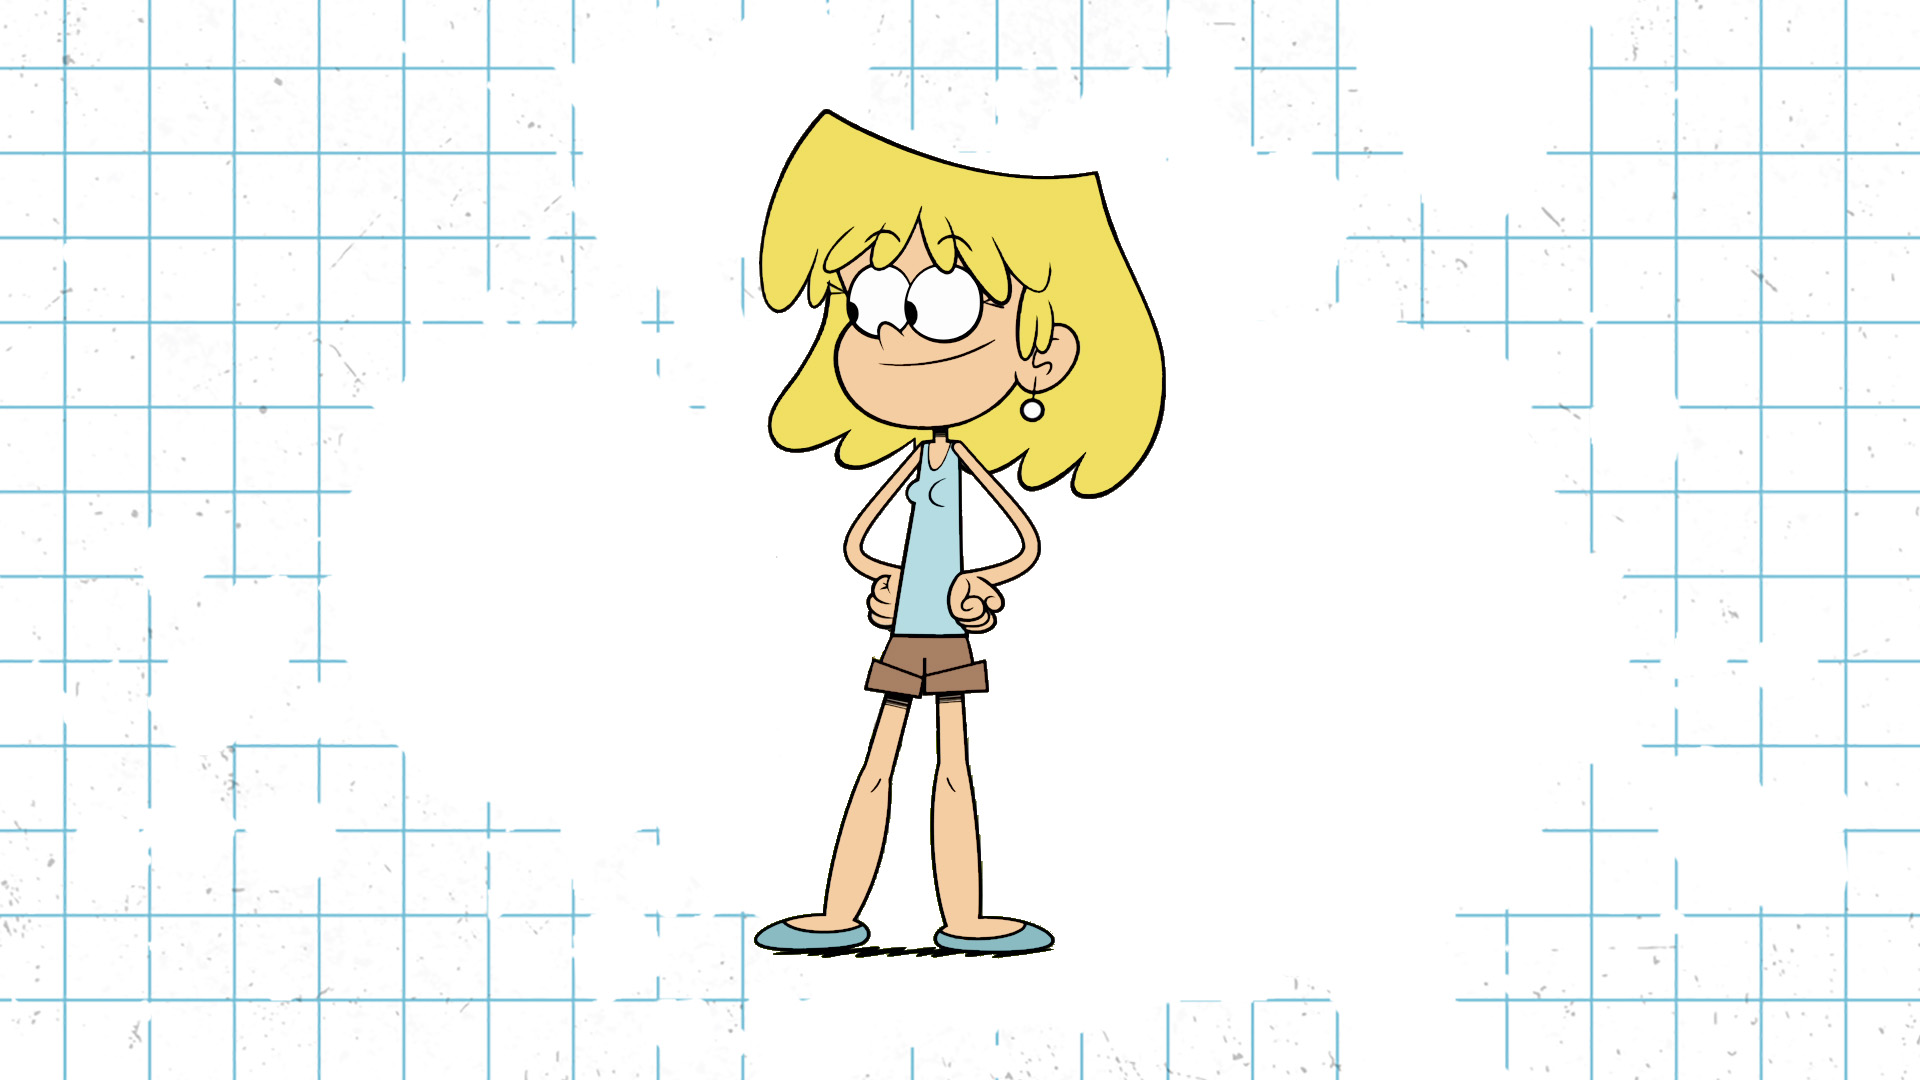 A Loud House character with blonde hair